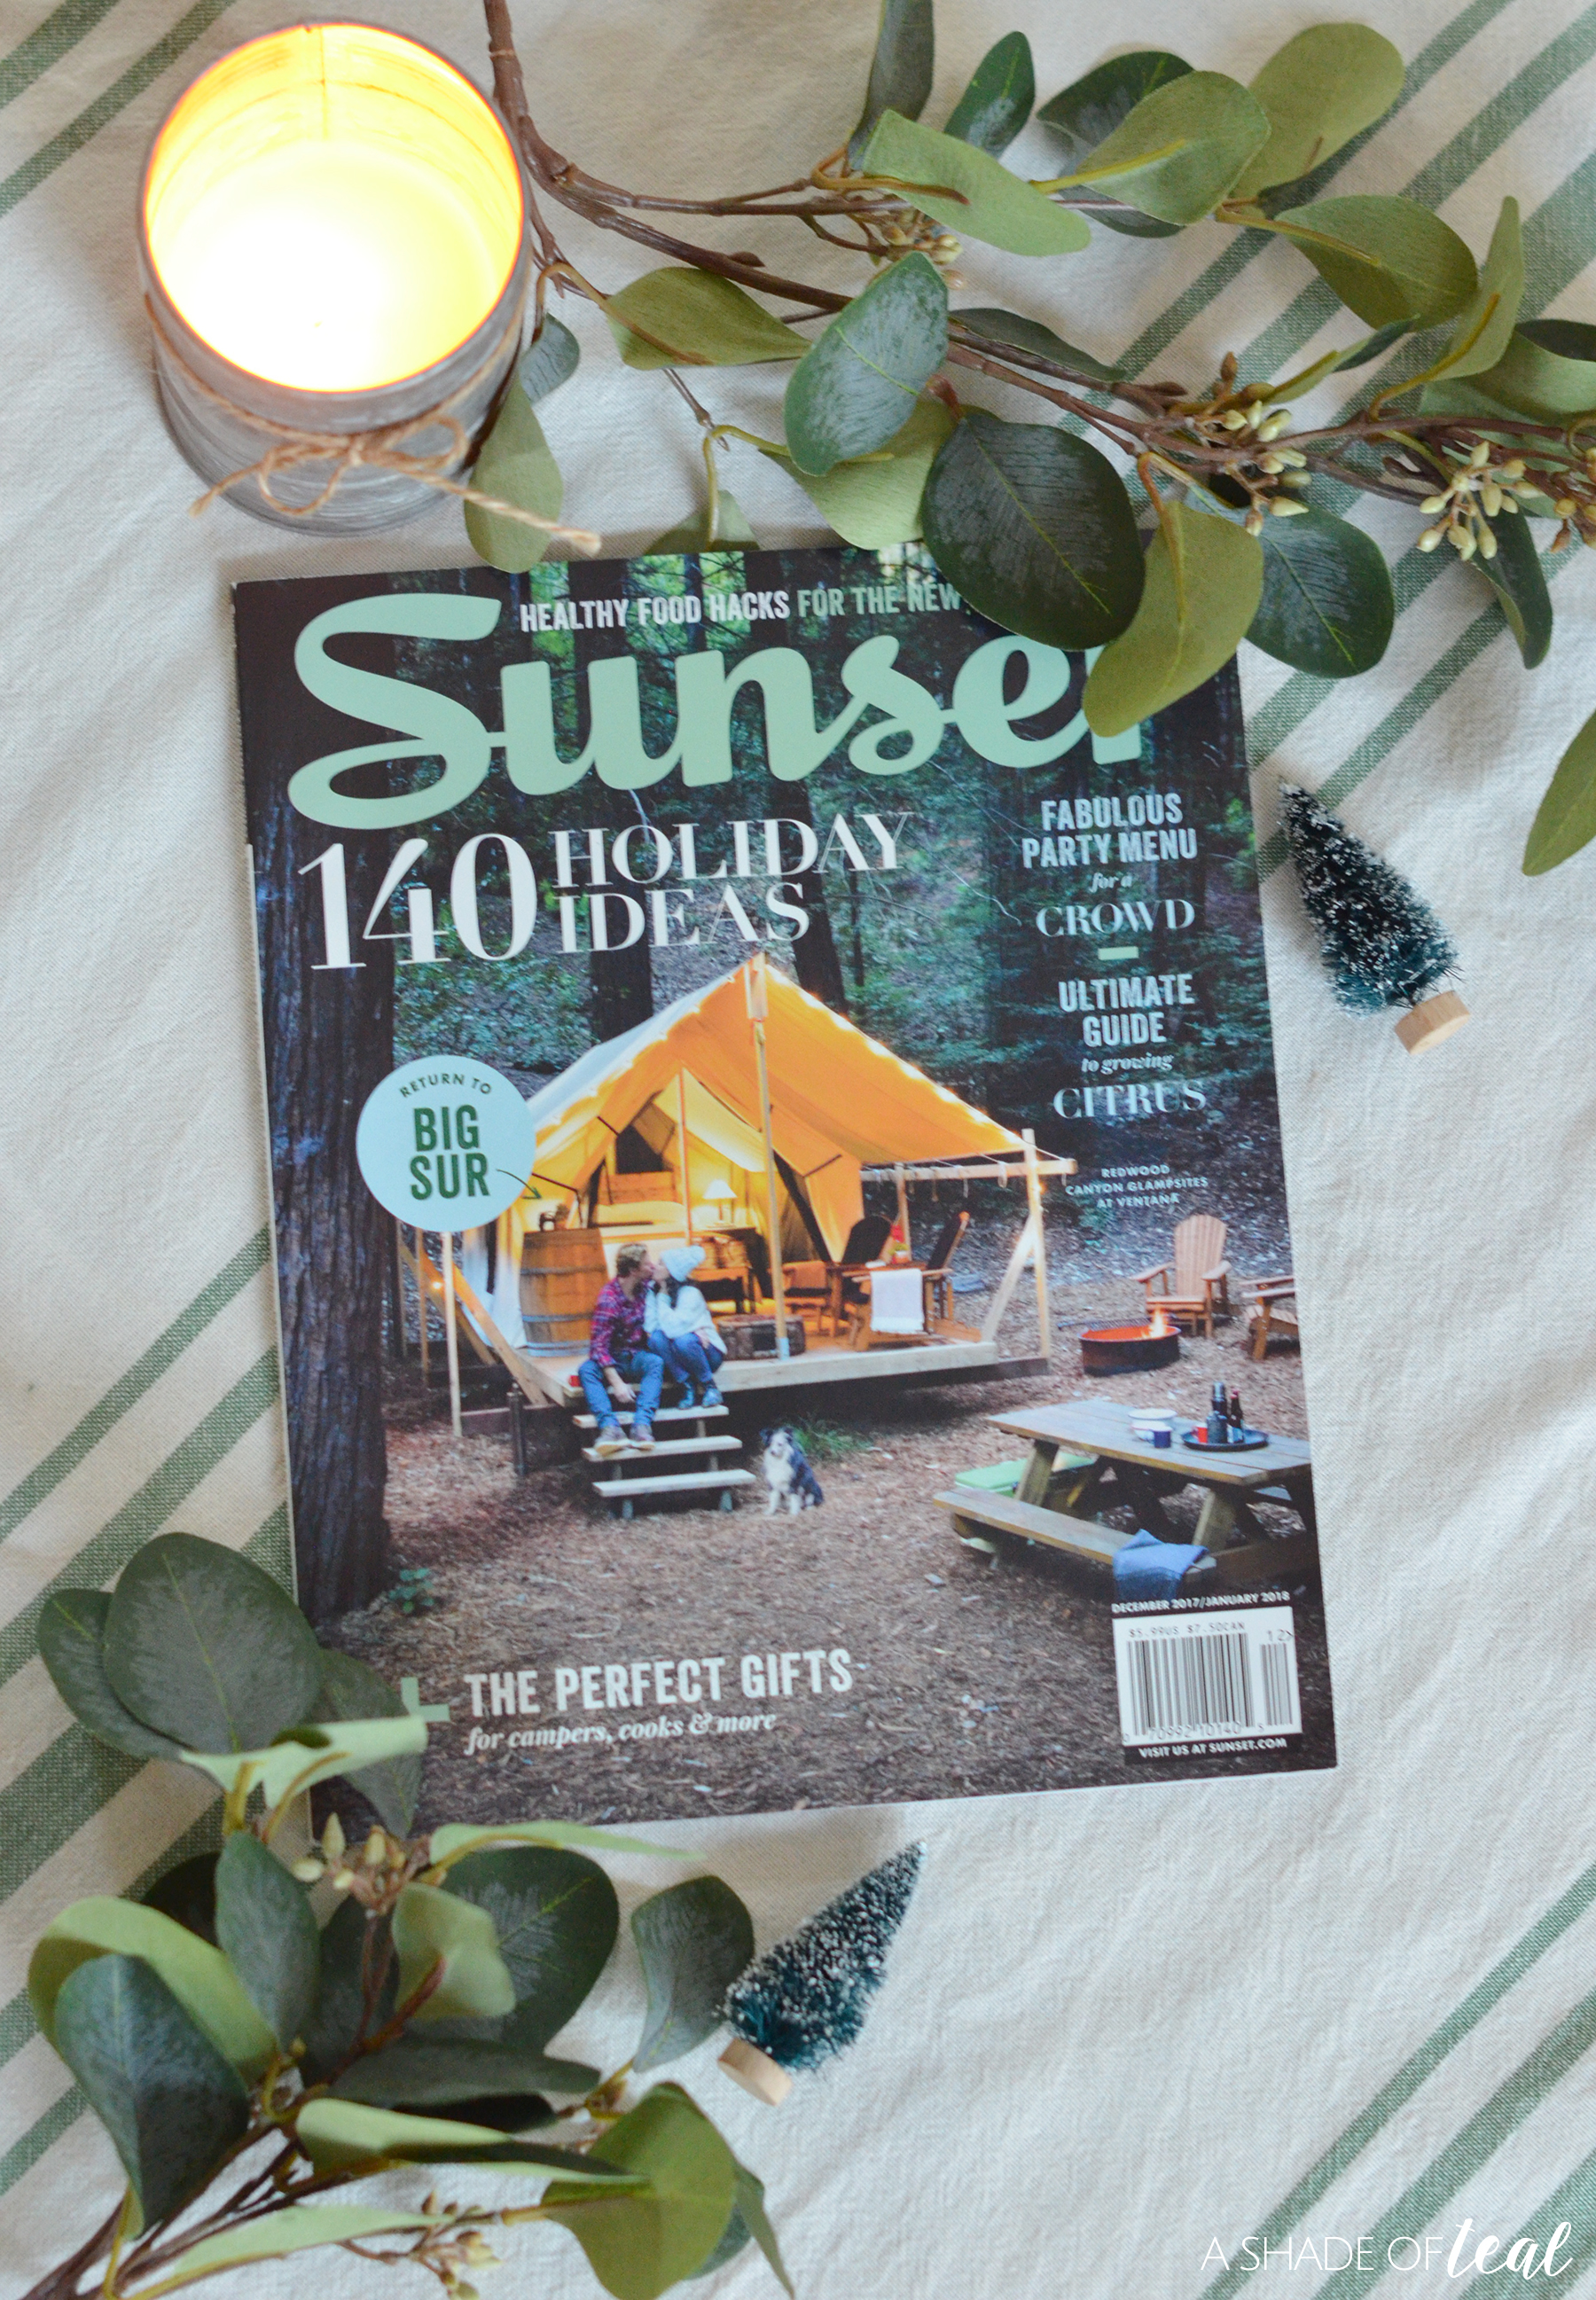 This Cool Culinary Brand Has Your Summer Covered - Sunset Magazine